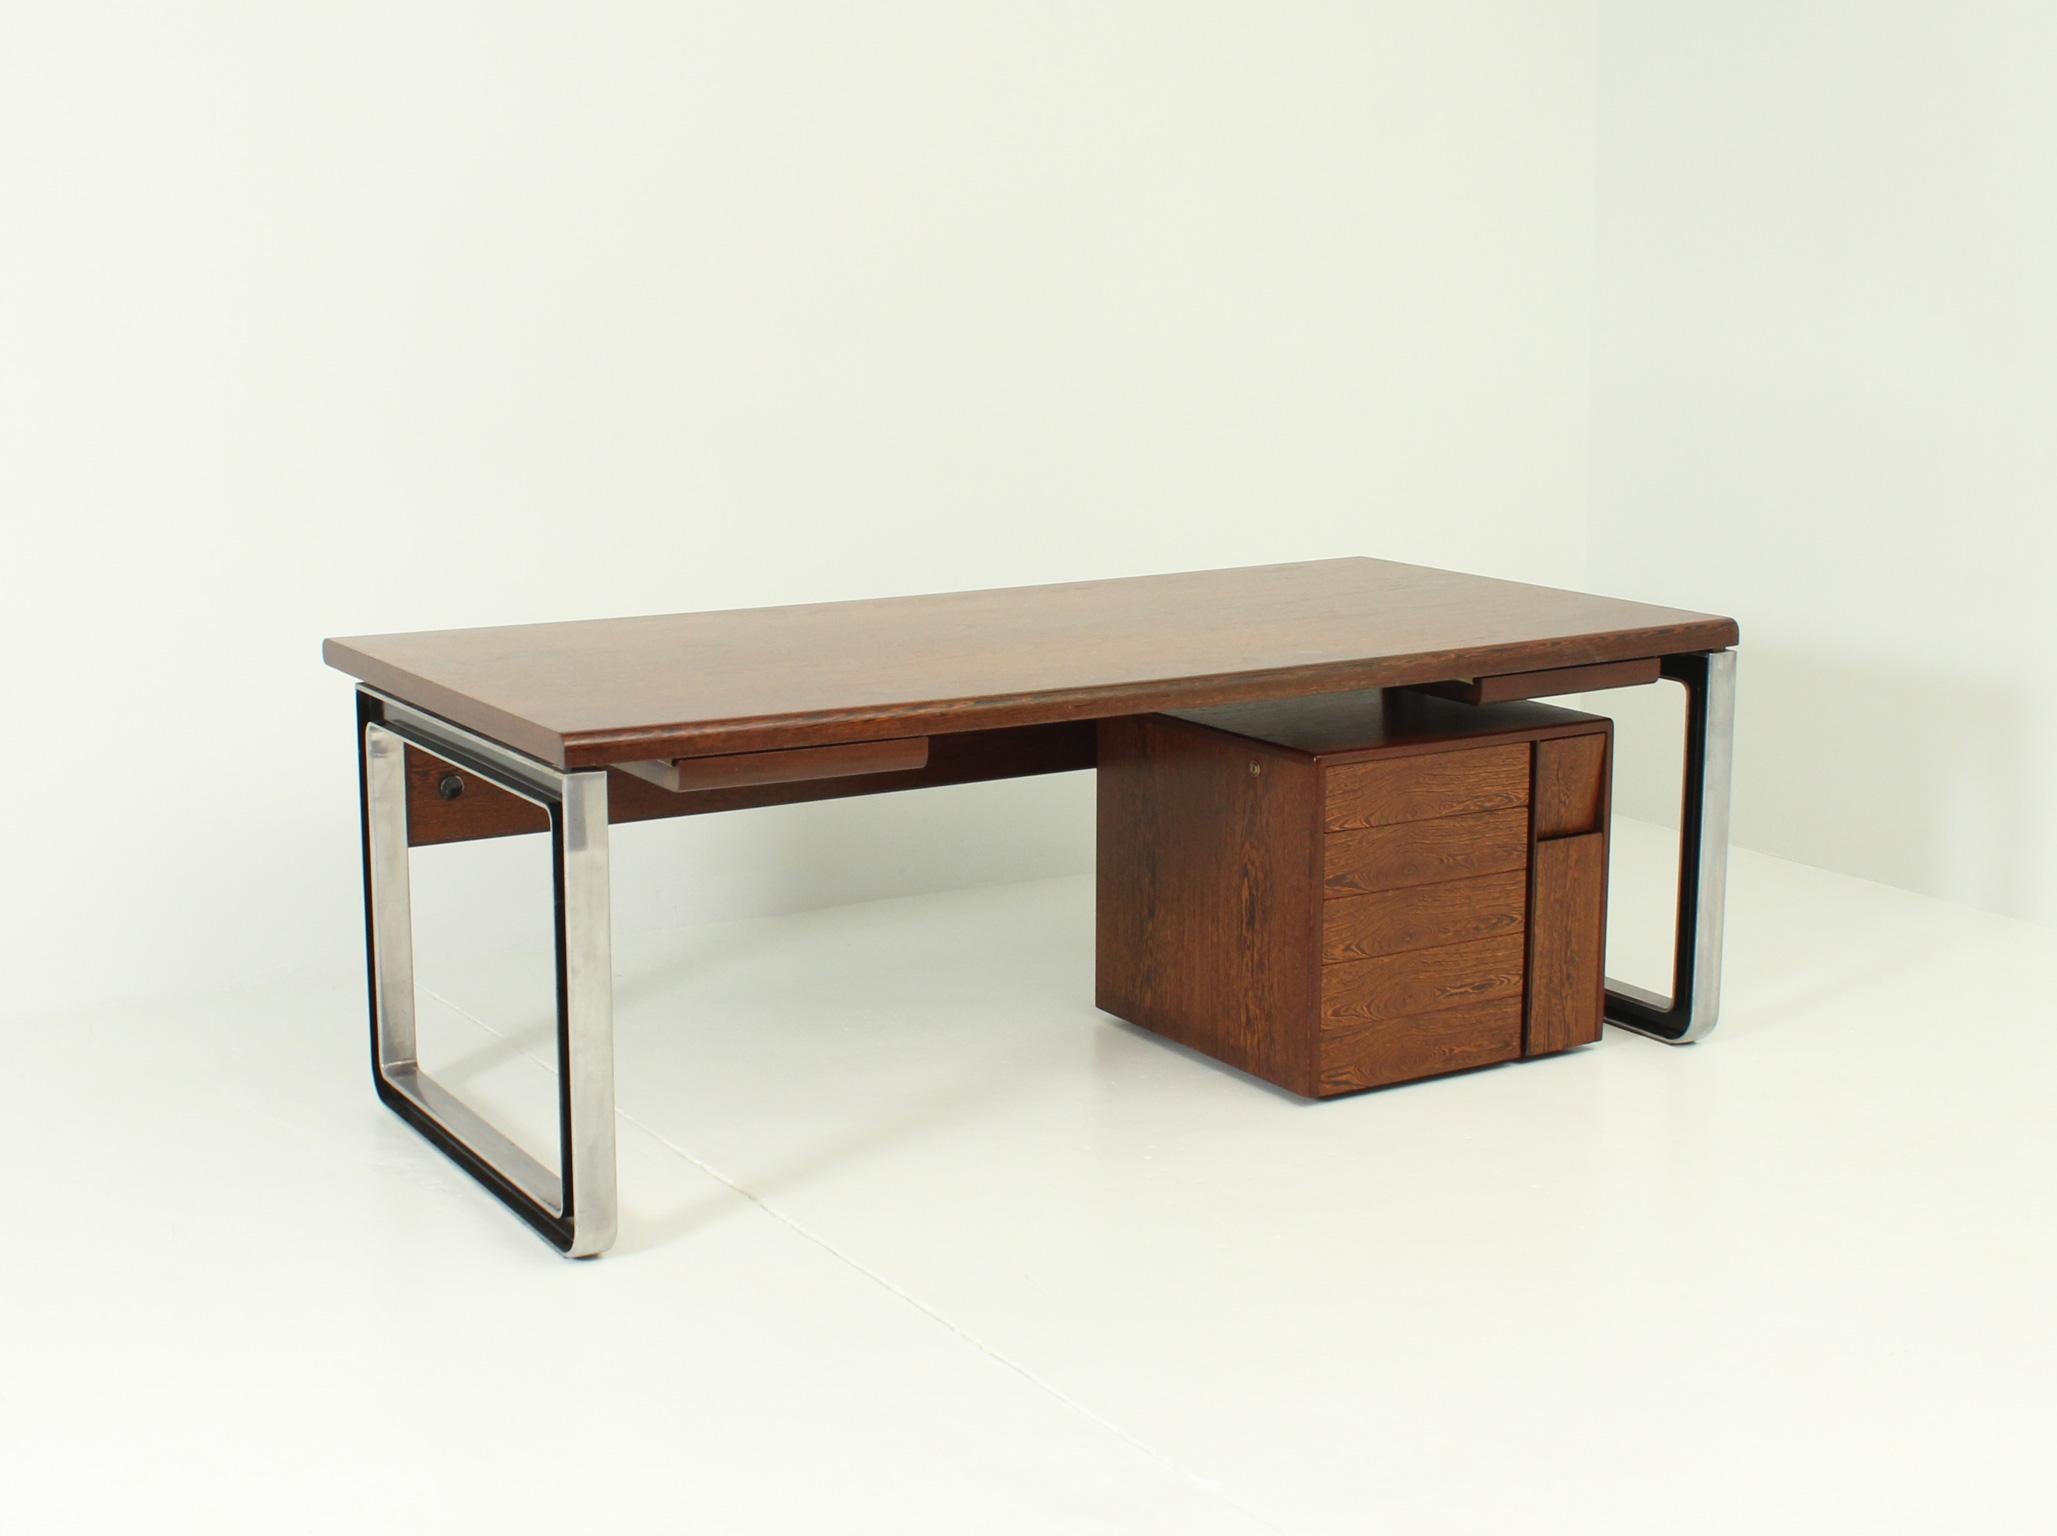 T333 desk designed in 1975 by Eugenio Gerli and Osvaldo Borsani for Tecno, Italy. Excellent wenge wood and polished aluminium bases. Easy assembly for this desk with a large utility surface, two hidden drawers and one sliding cube with four drawers